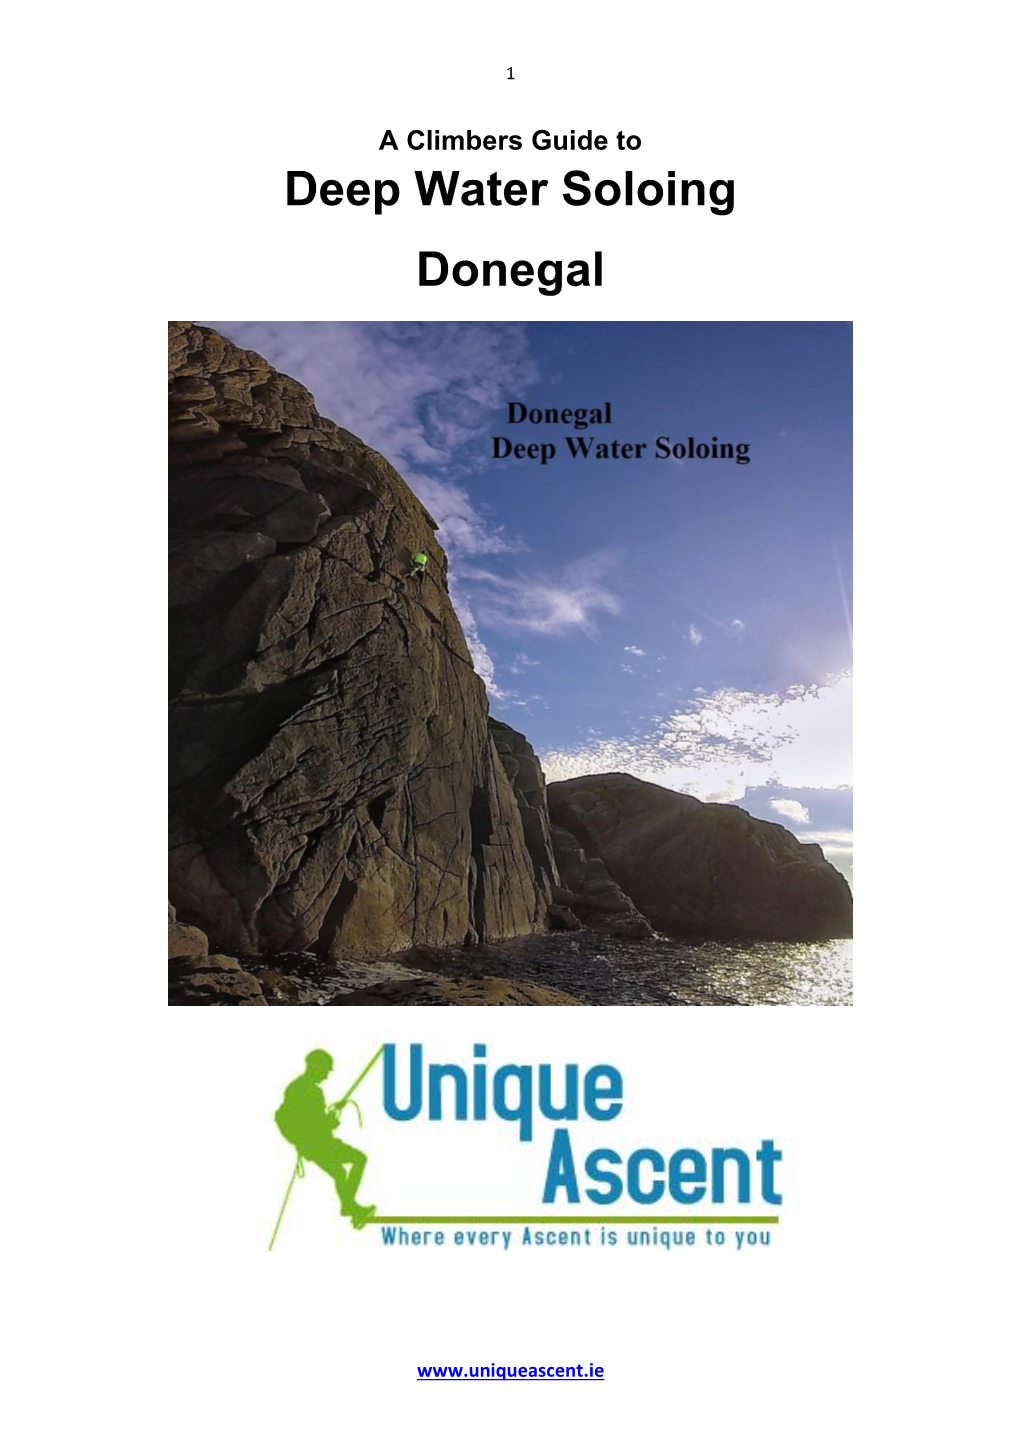 A Climbers Guide to Deep Water Soloing Donegal